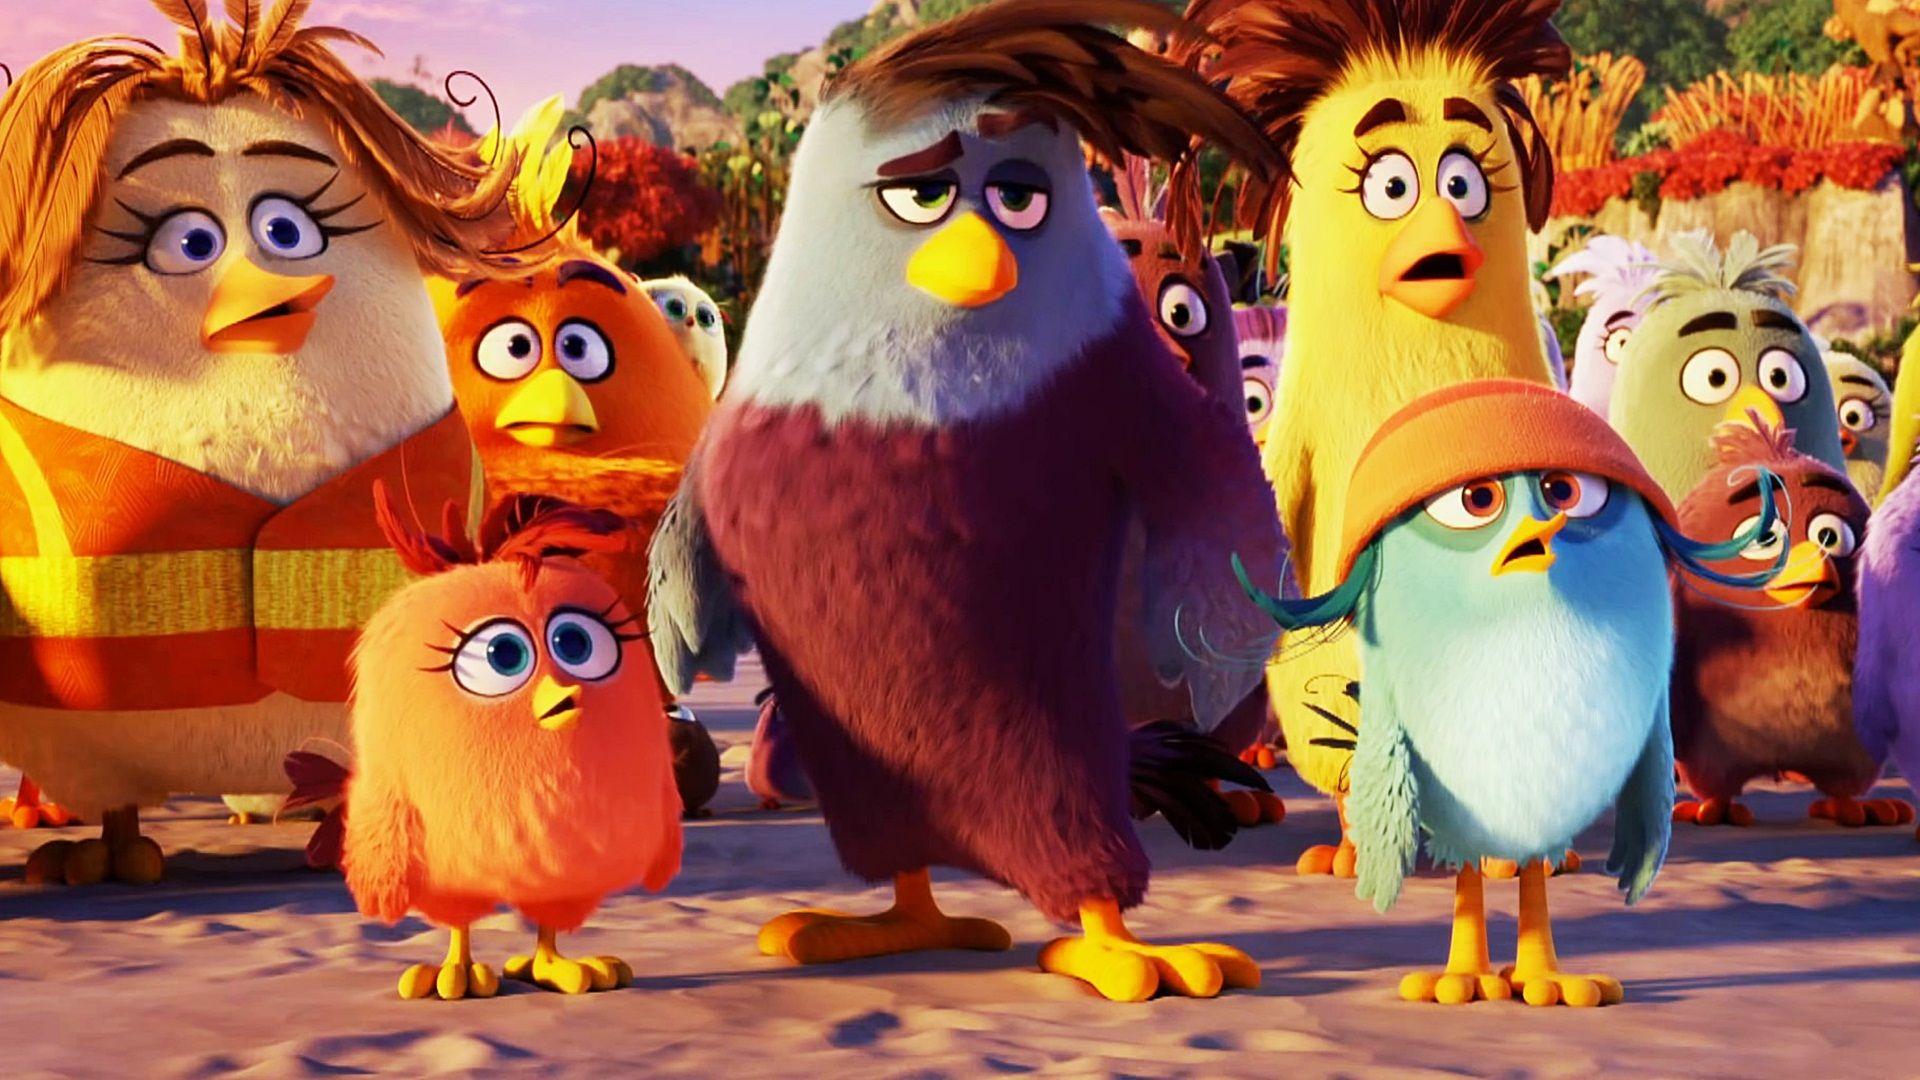 The Angry Birds Movie Wallpaper High Resolution and Quality Download